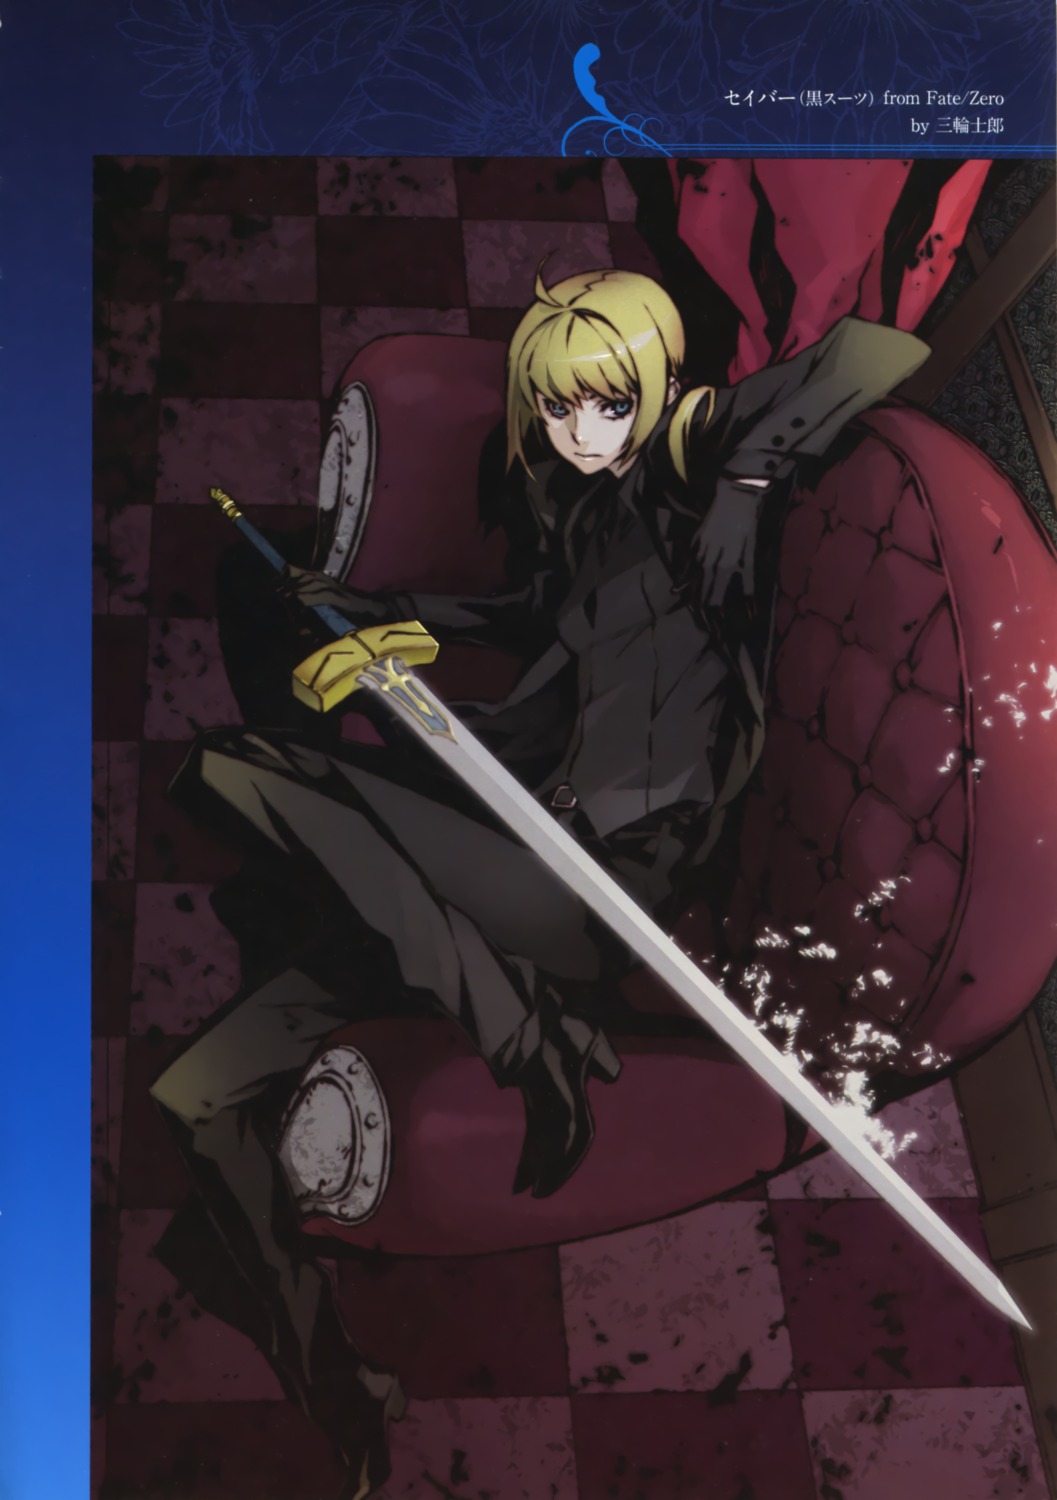 Type Moon Miwa Shirow Fate Stay Night Fate Zero Saber Business Suit Sword Yande Re